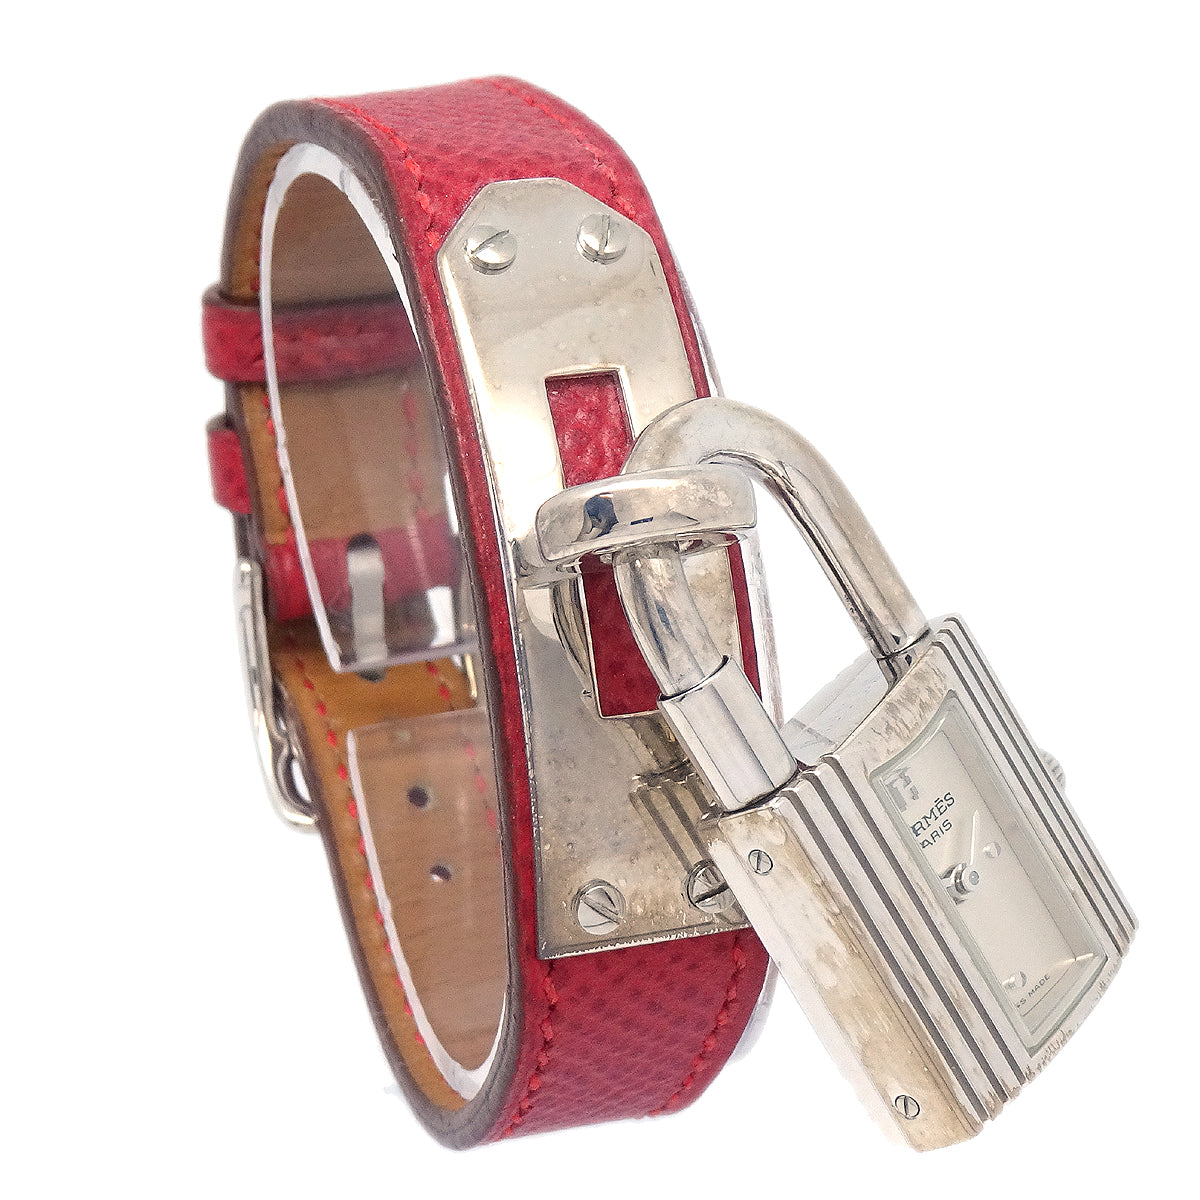 Hermes 1996 Kelly Watch Red Courchevel SV925